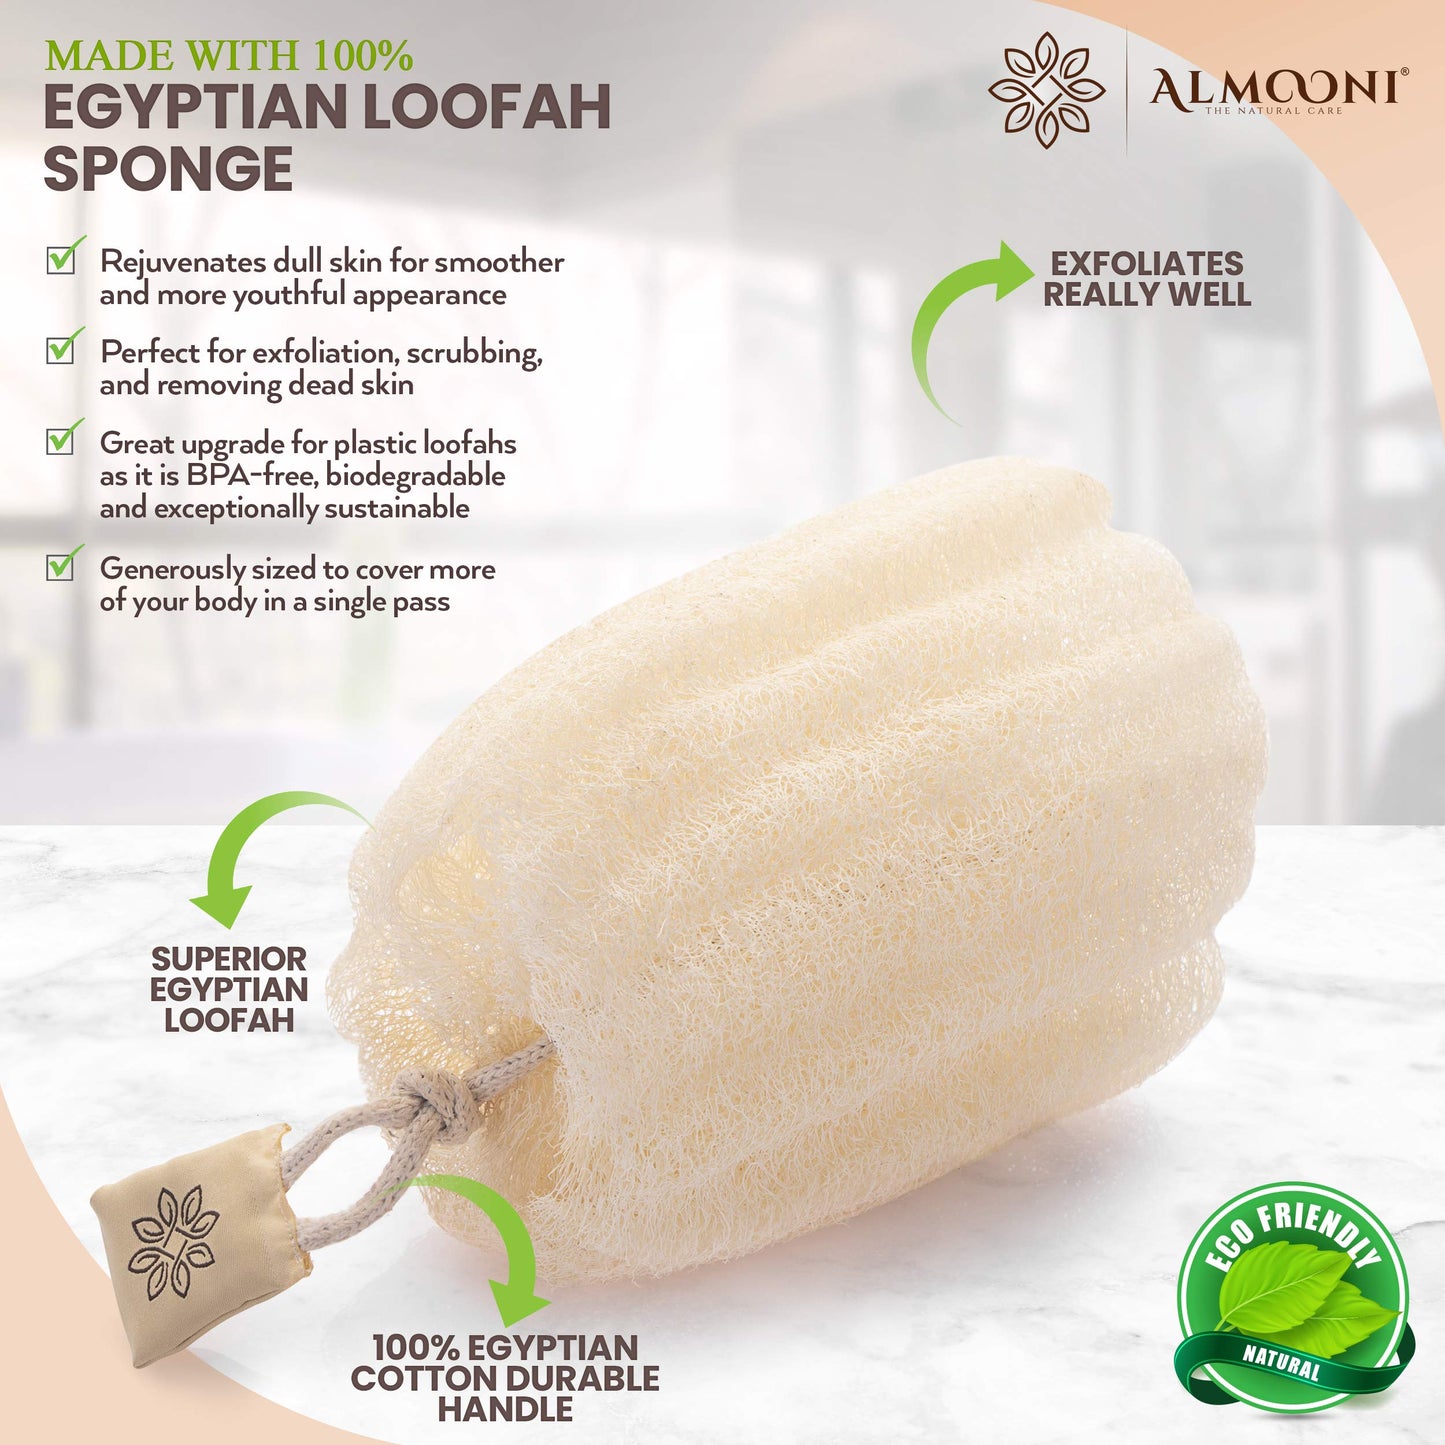 Aloomi: Egyptian Loofah Exfoliating Body Scrubber (3 Count 1 Pack)